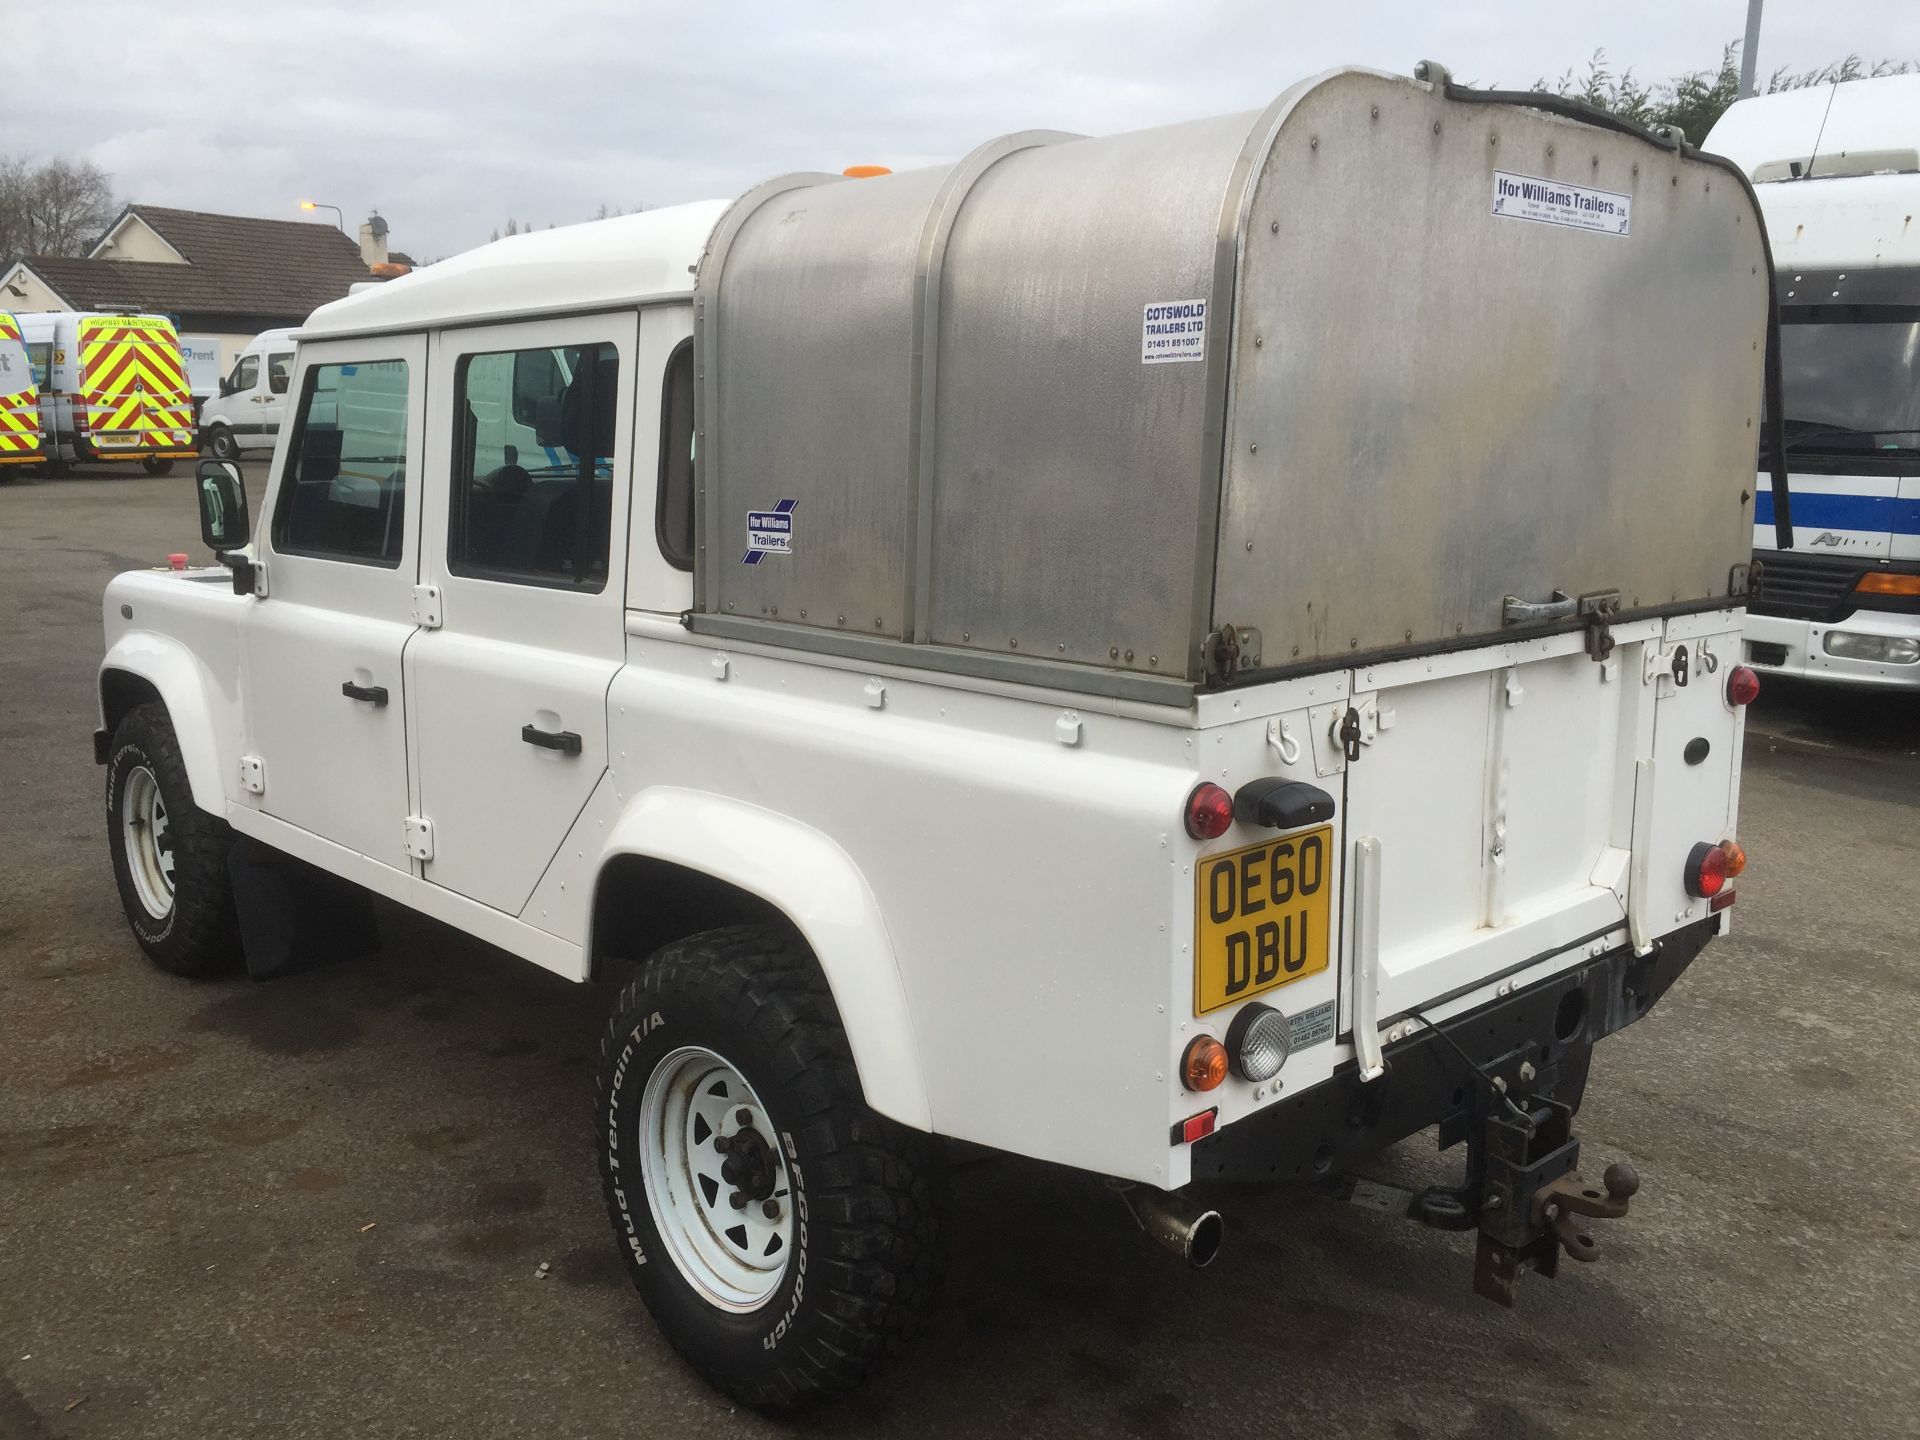 2010 / 60 Land Rover Defender 130 Double Cab - Image 3 of 8